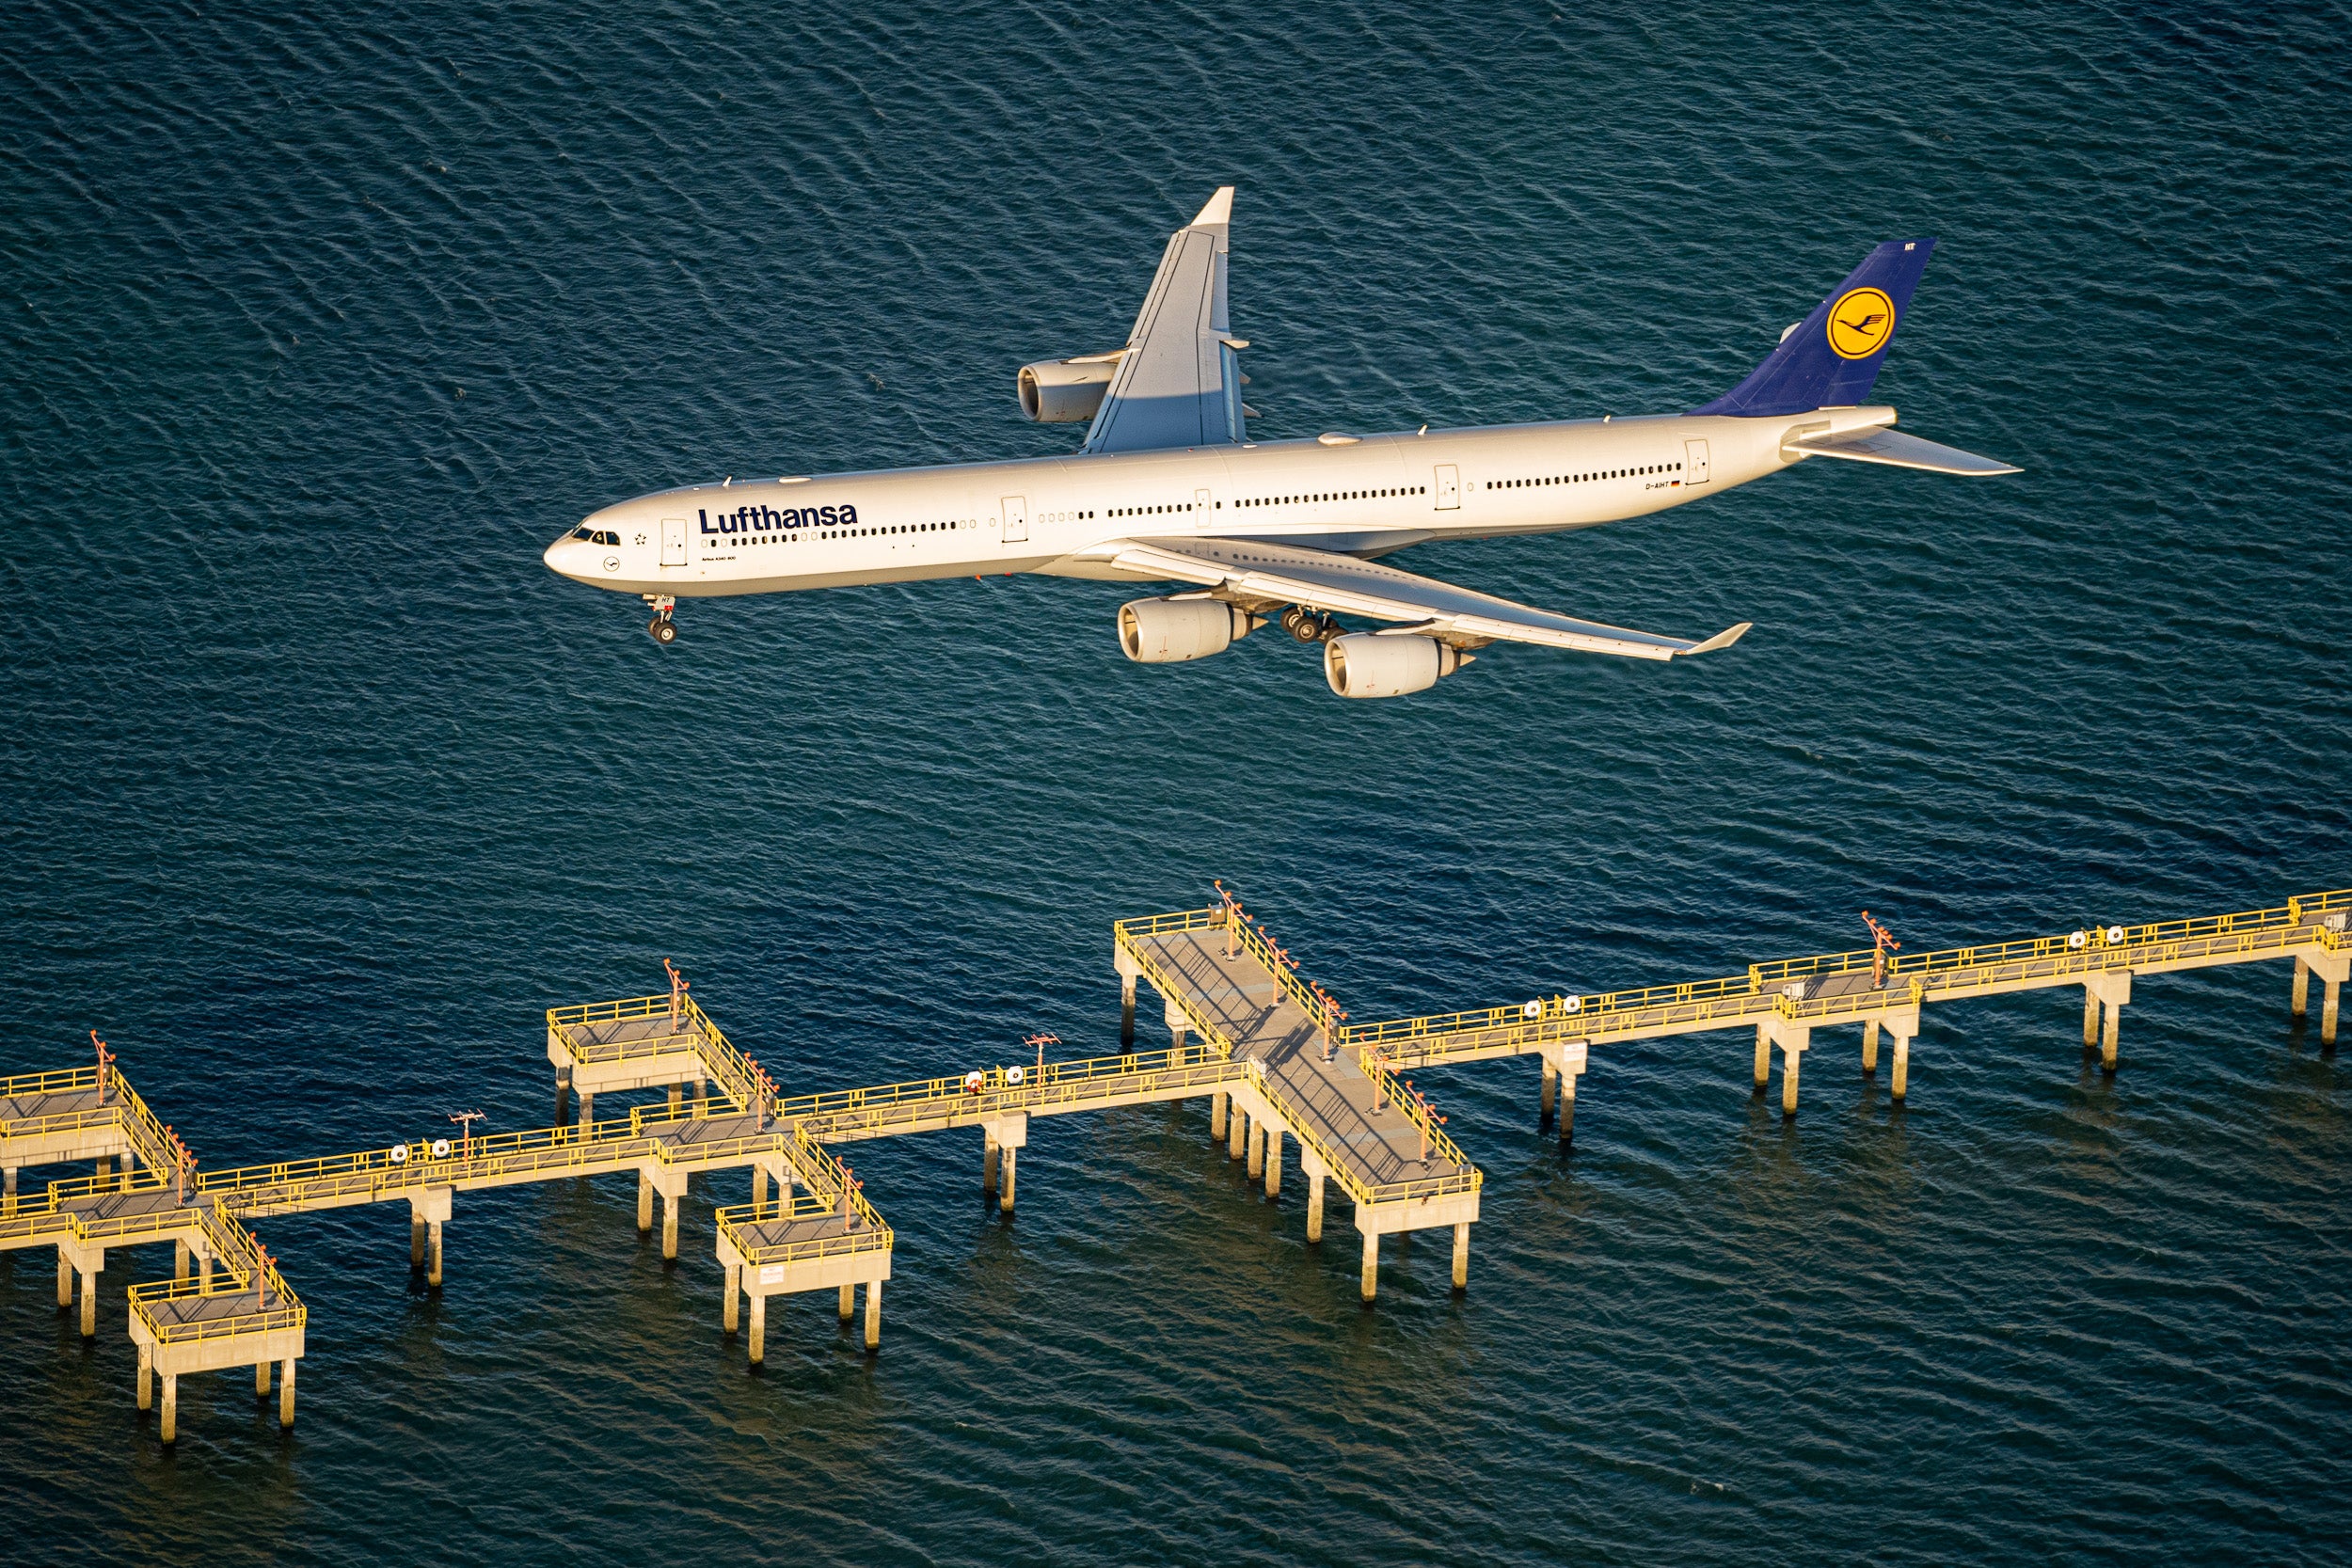 A Lufthansa A340-600 flies over landing marker beacons on a pier on the water just off of the edge of Boston Logan airport.